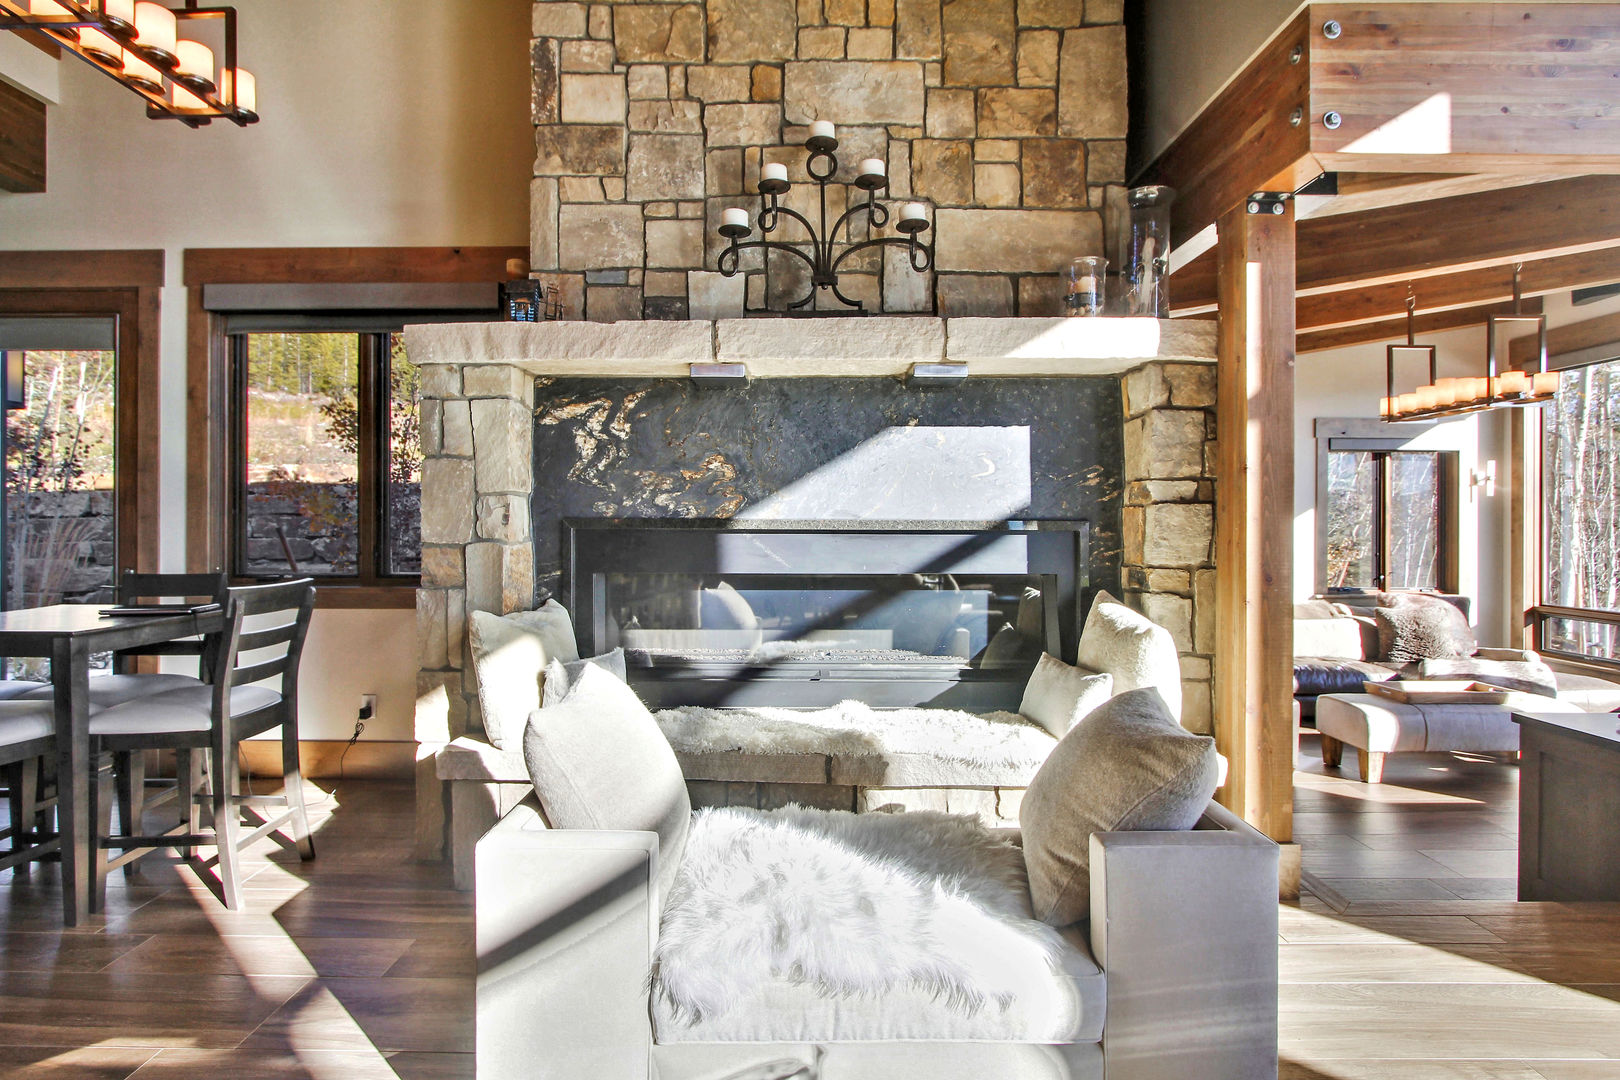 Fireplace with Cozy Furniture in Our Vacation Homes in Winter Park, Colorado.